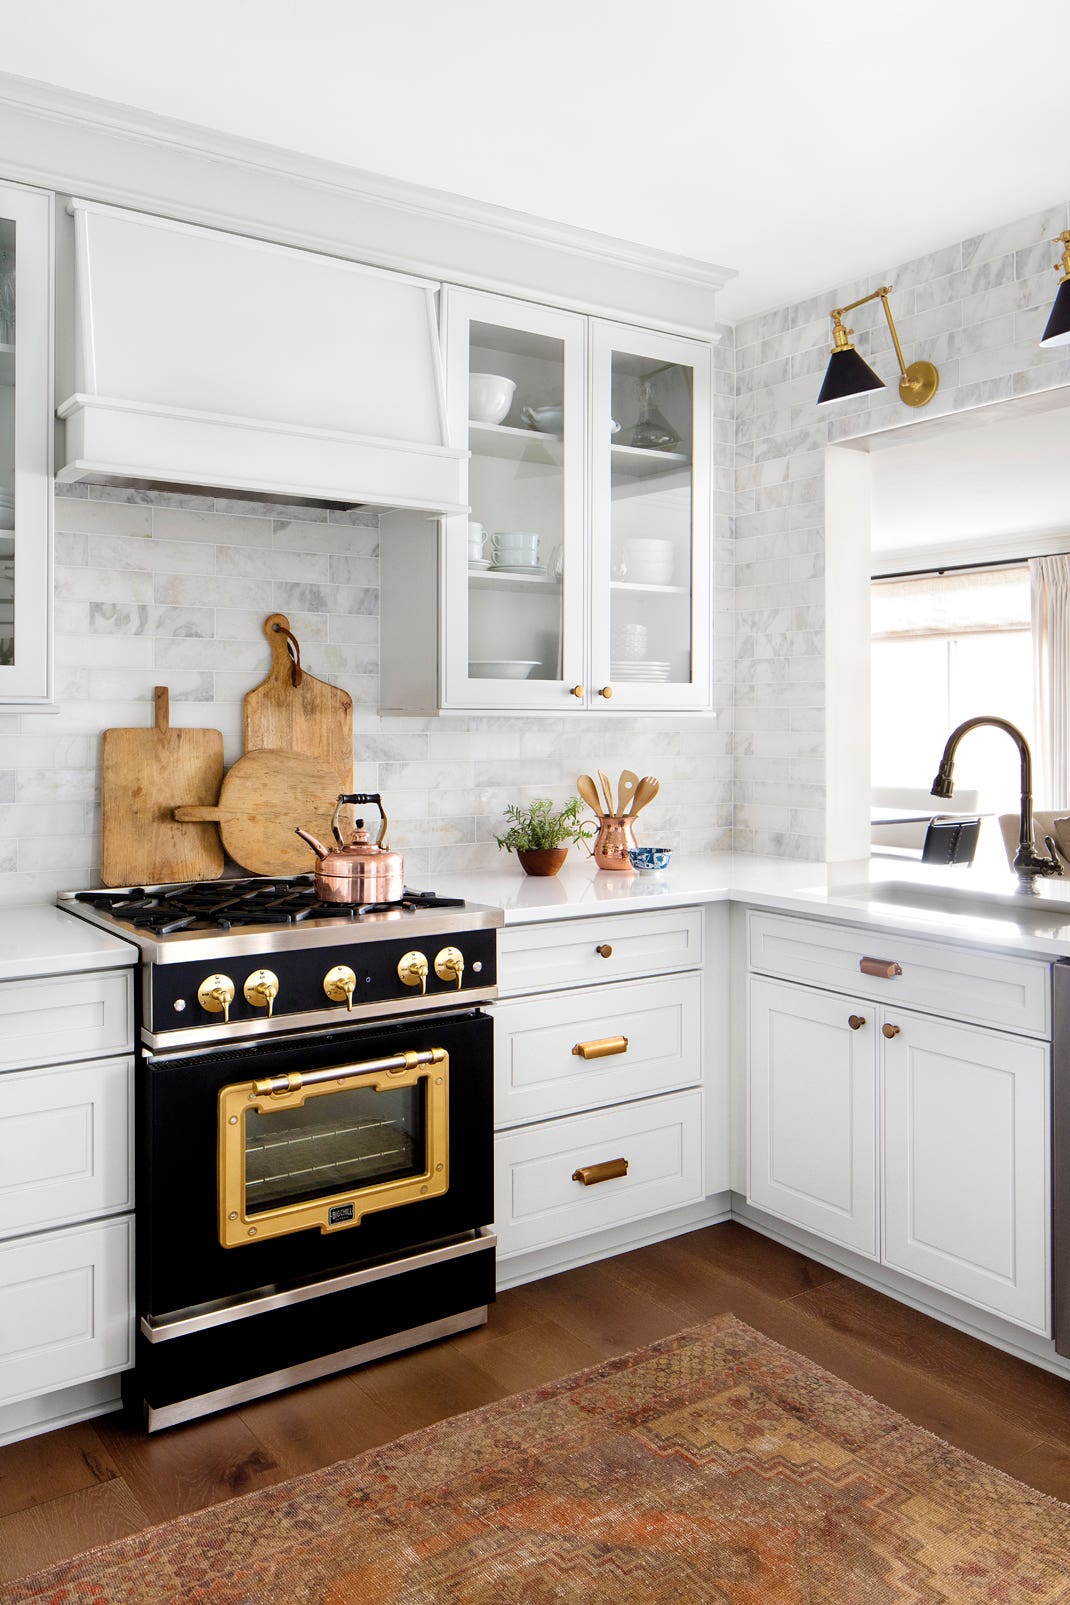 6 Cabinet Styles For Your Next Kitchen Reno | domino